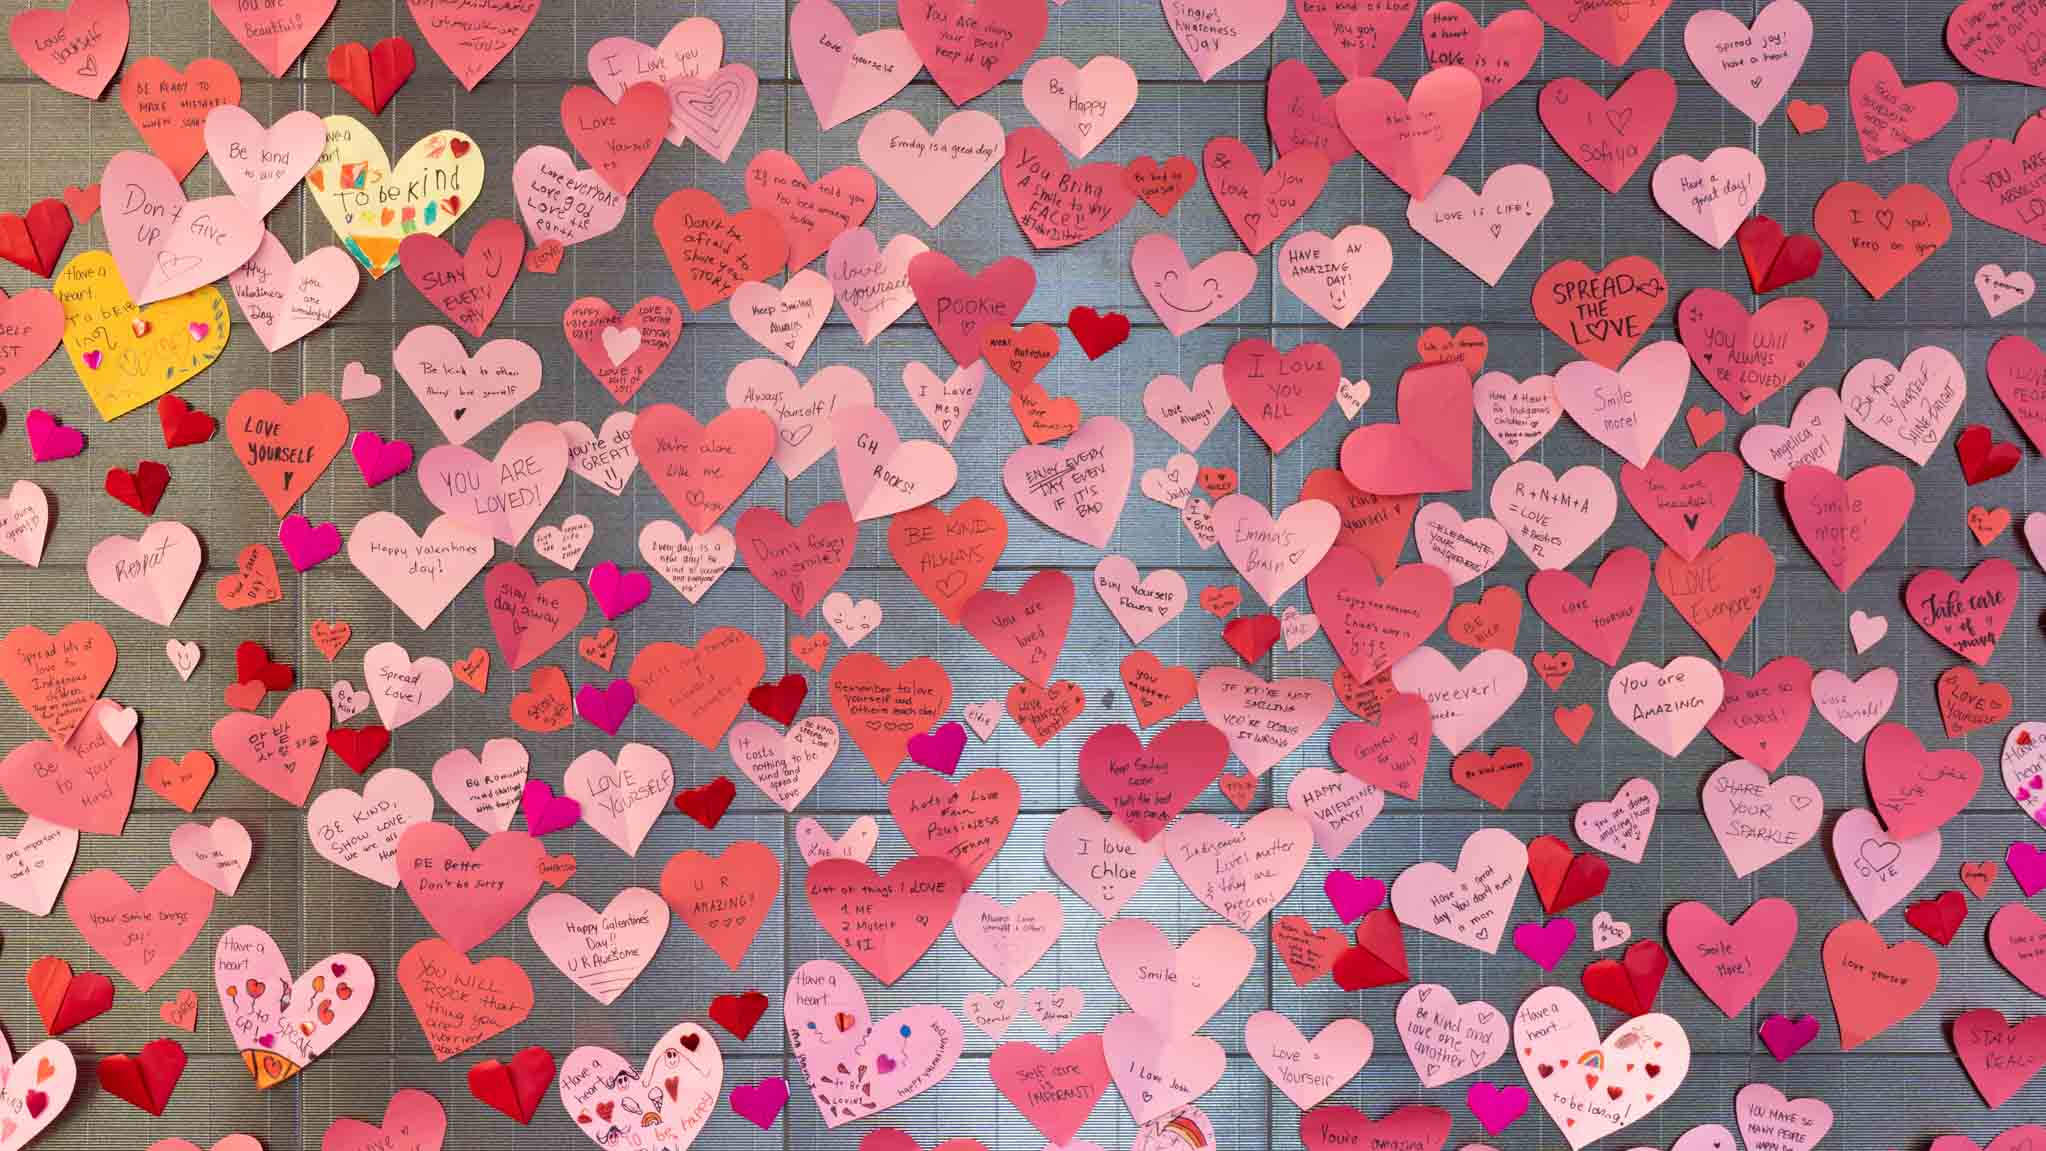 Paper hearts cover a wall at University of Guelph-Humber